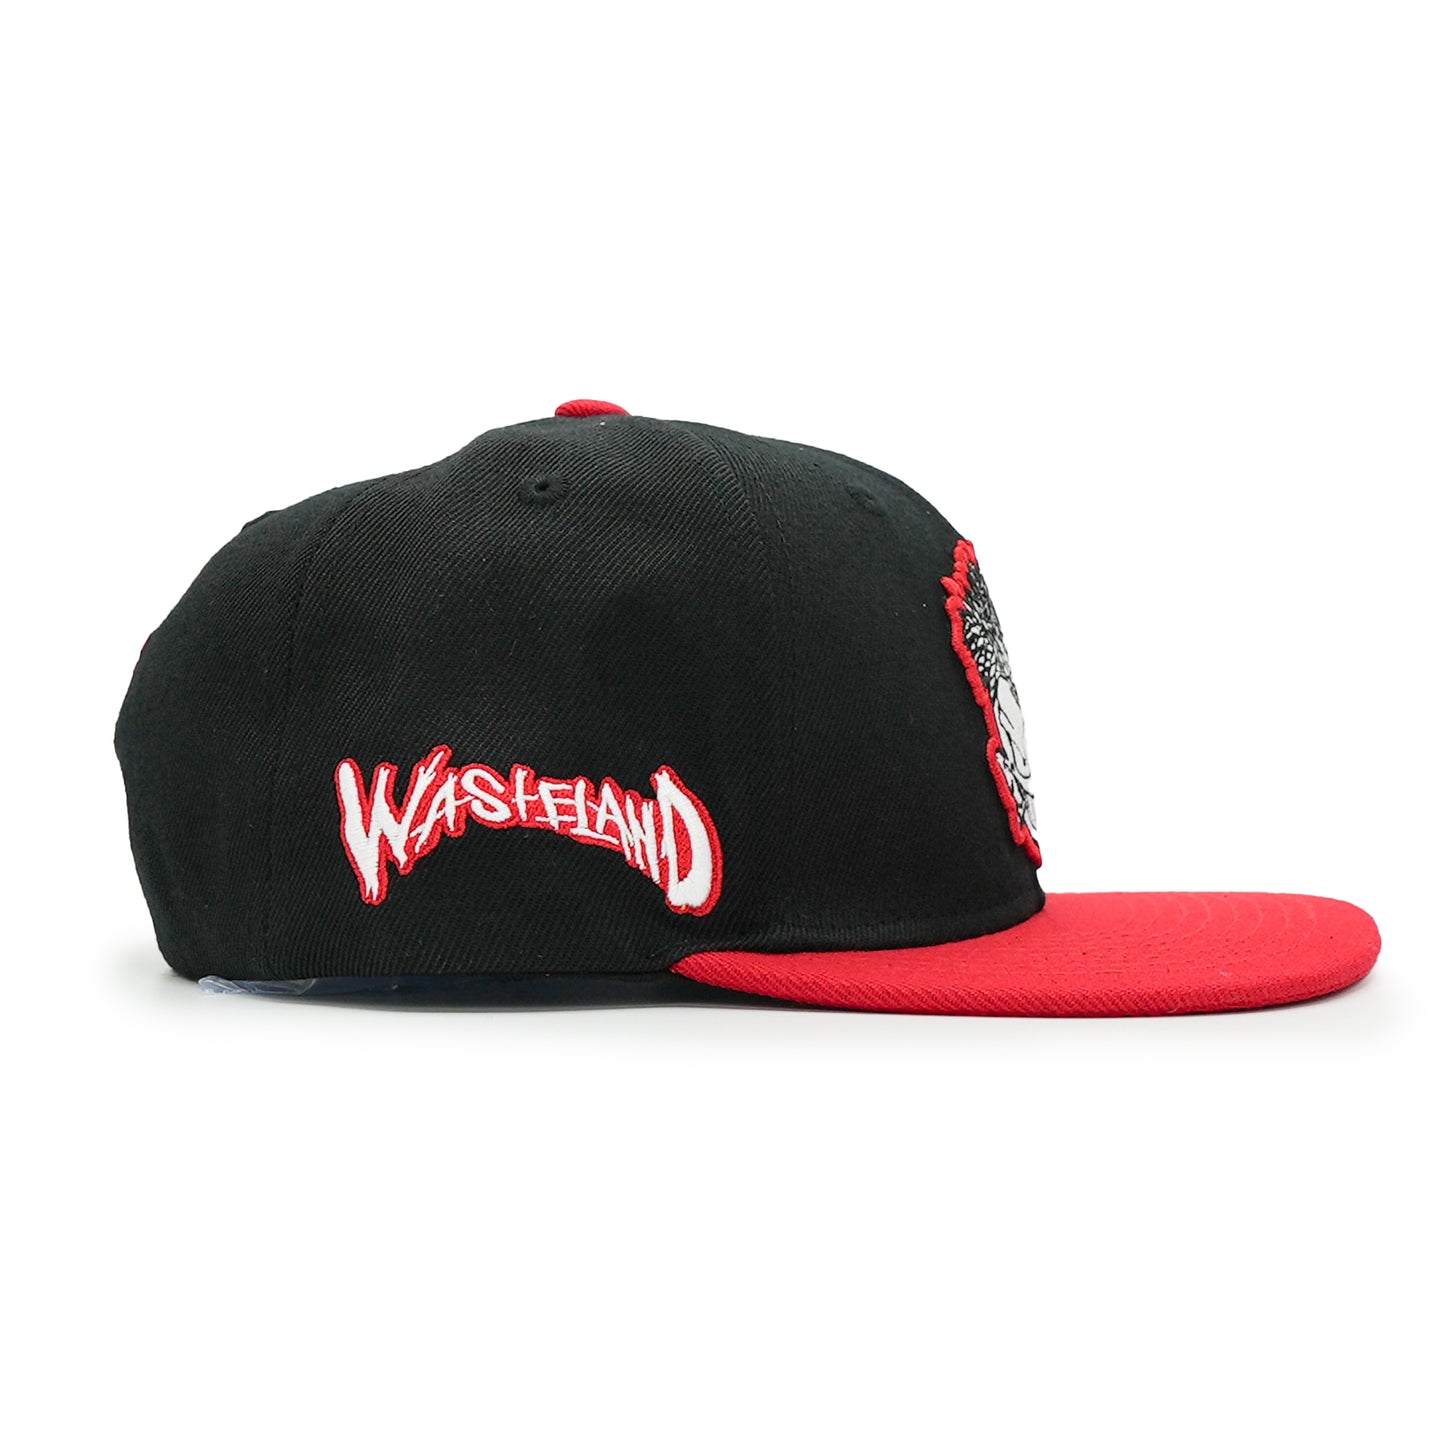 Elements Snapback - Wasteland - Black with Red Bill